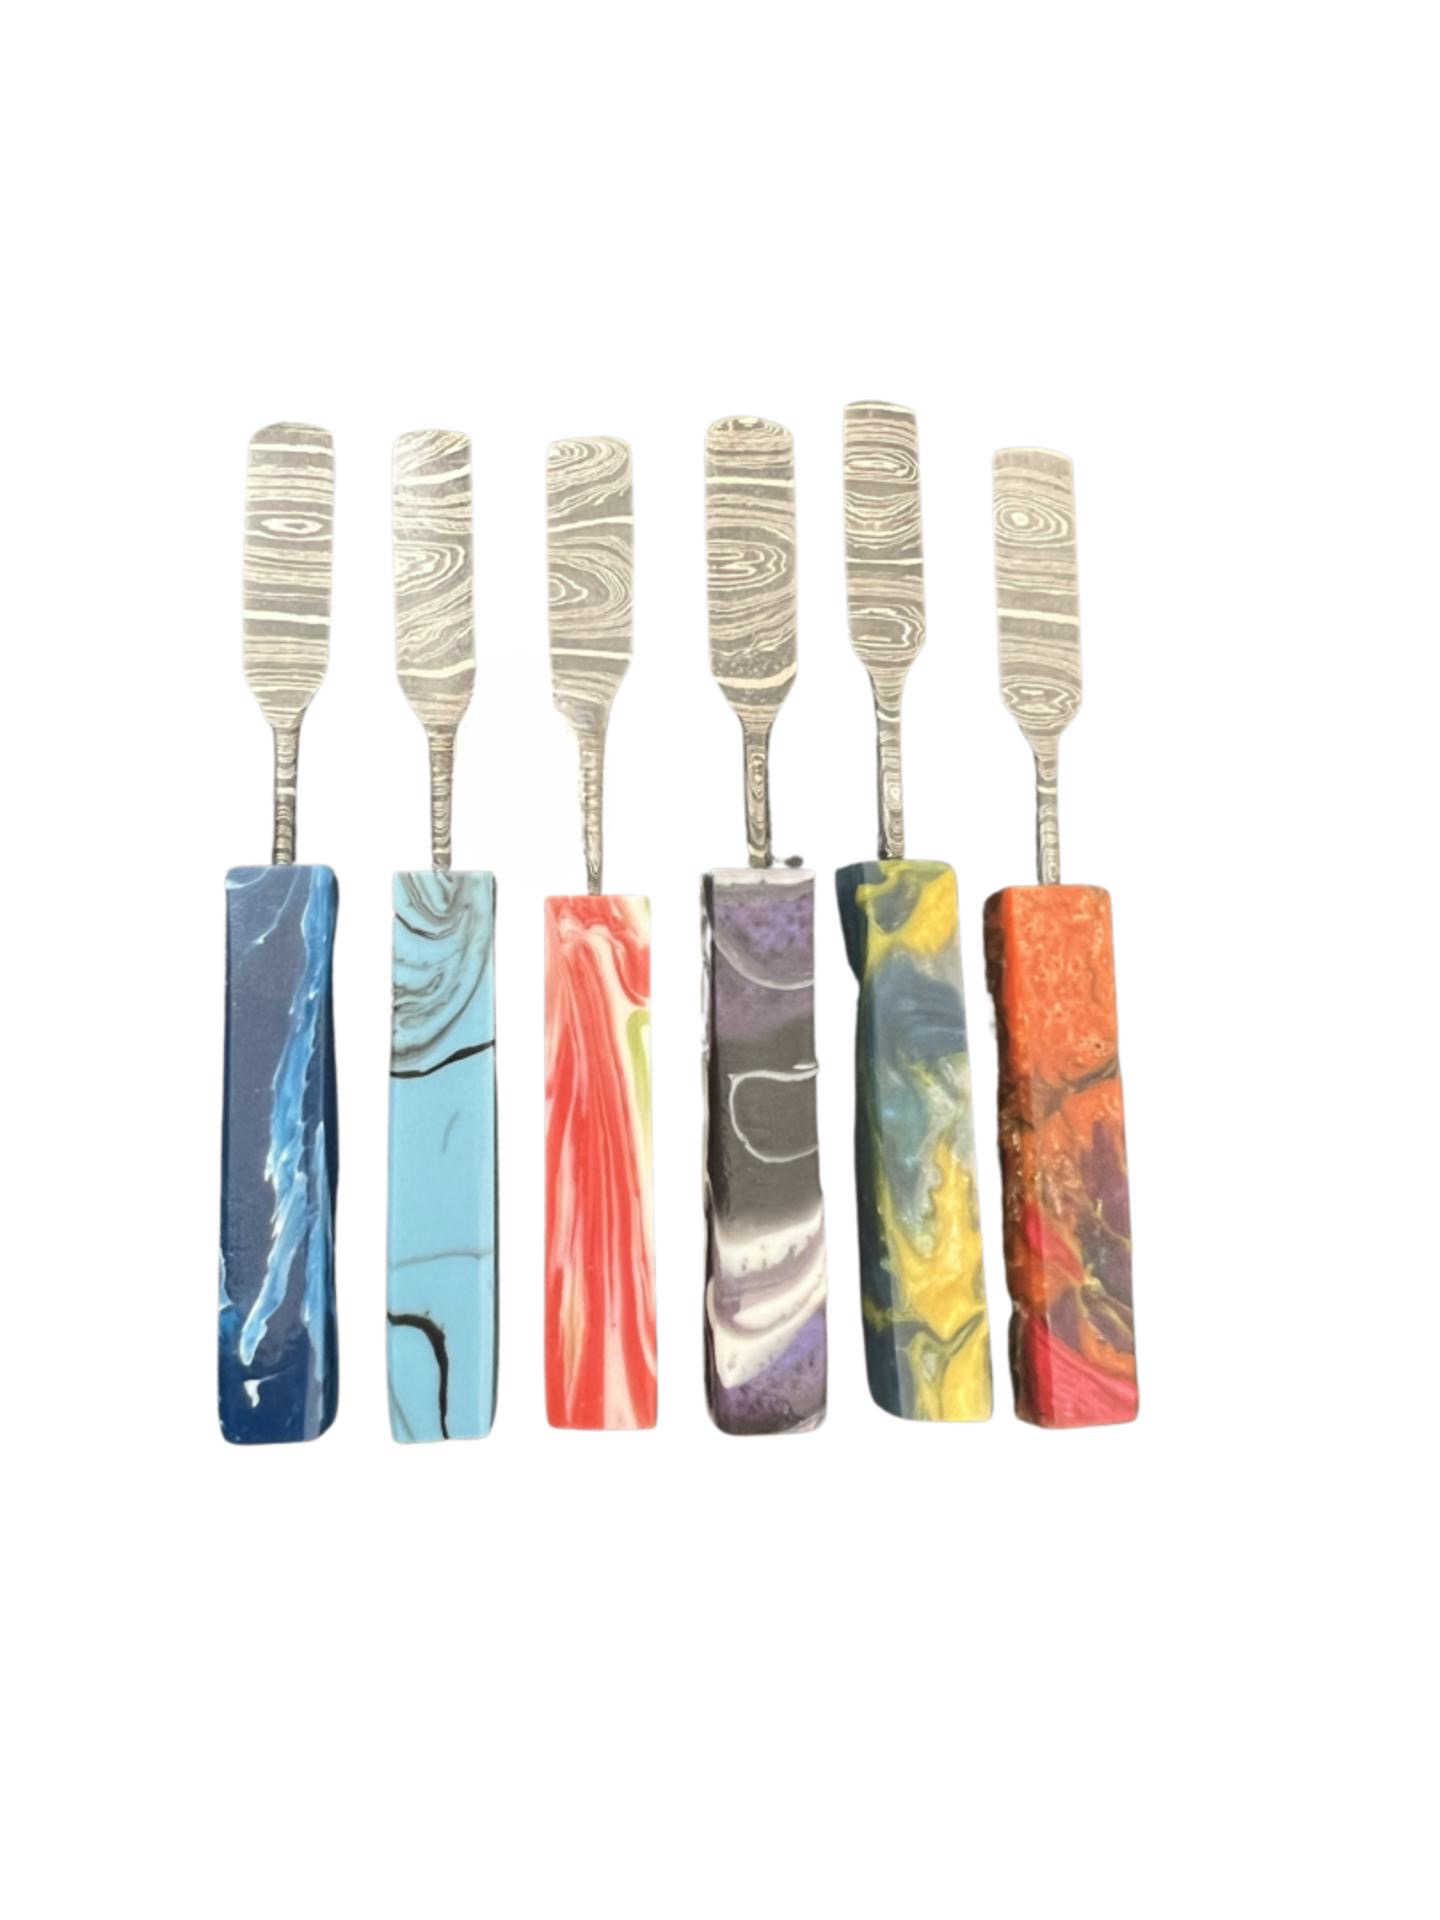 Resin Tools Damascus Dabber - The Spatula image 1